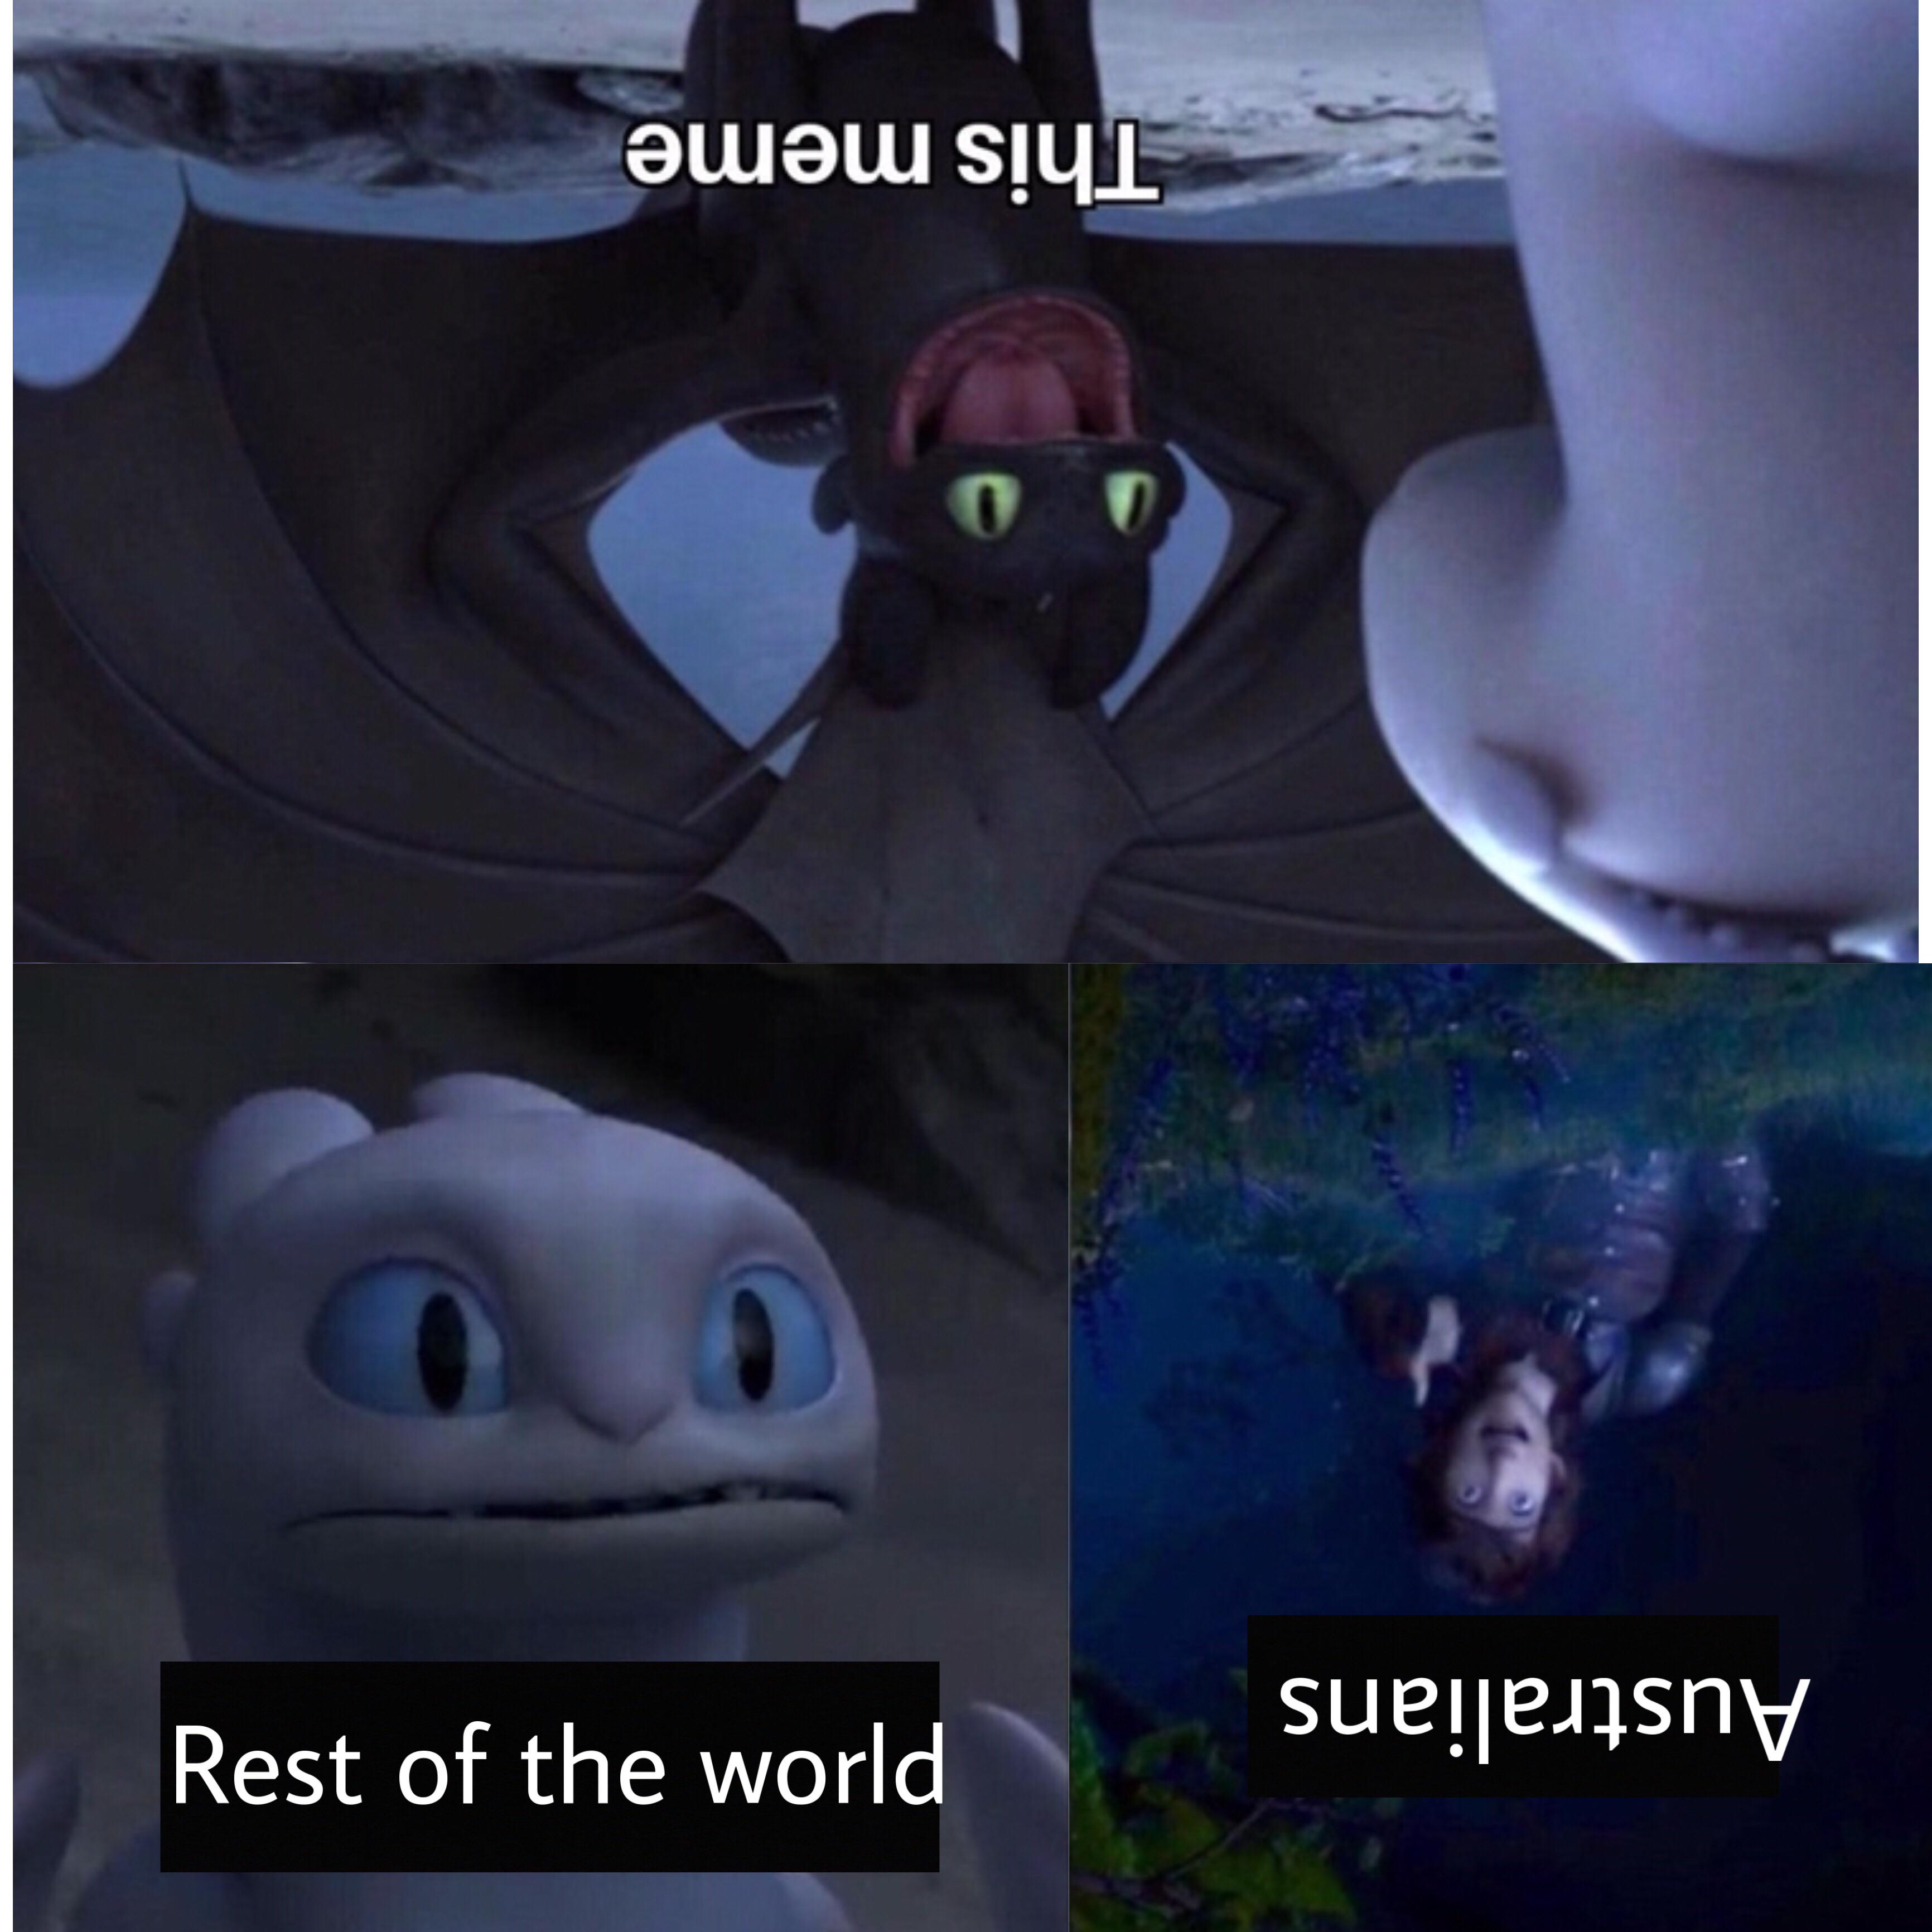 toothless how to train your dragon meme about photo caption - This meme Australians Rest of the world